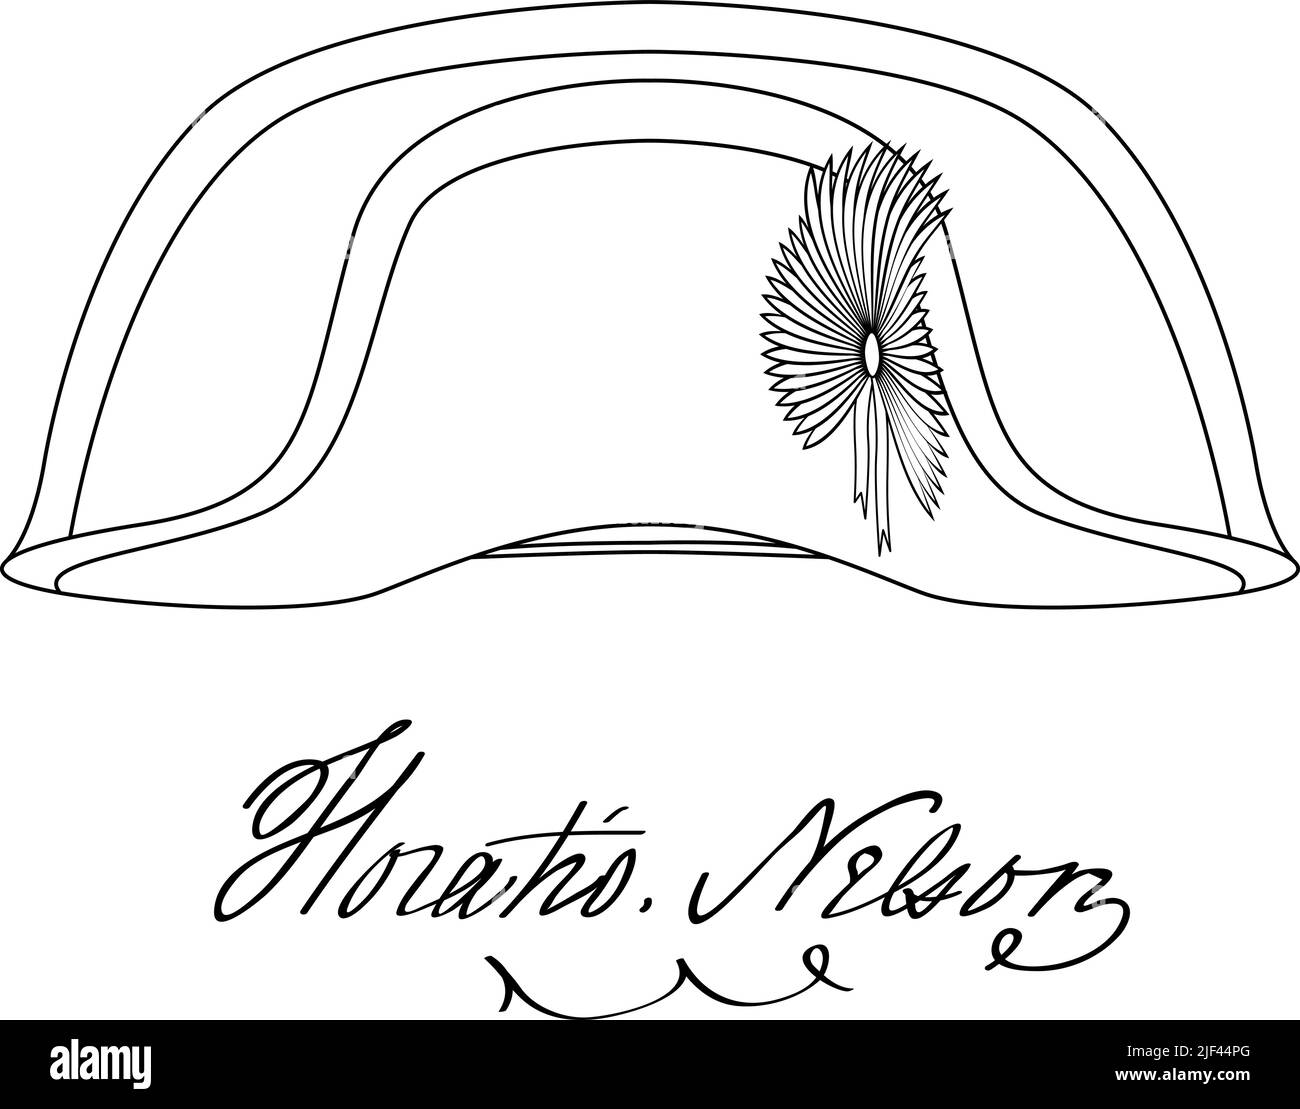 Horatio Nelson hat and signature, famous british admiral, vector illustration Stock Vector